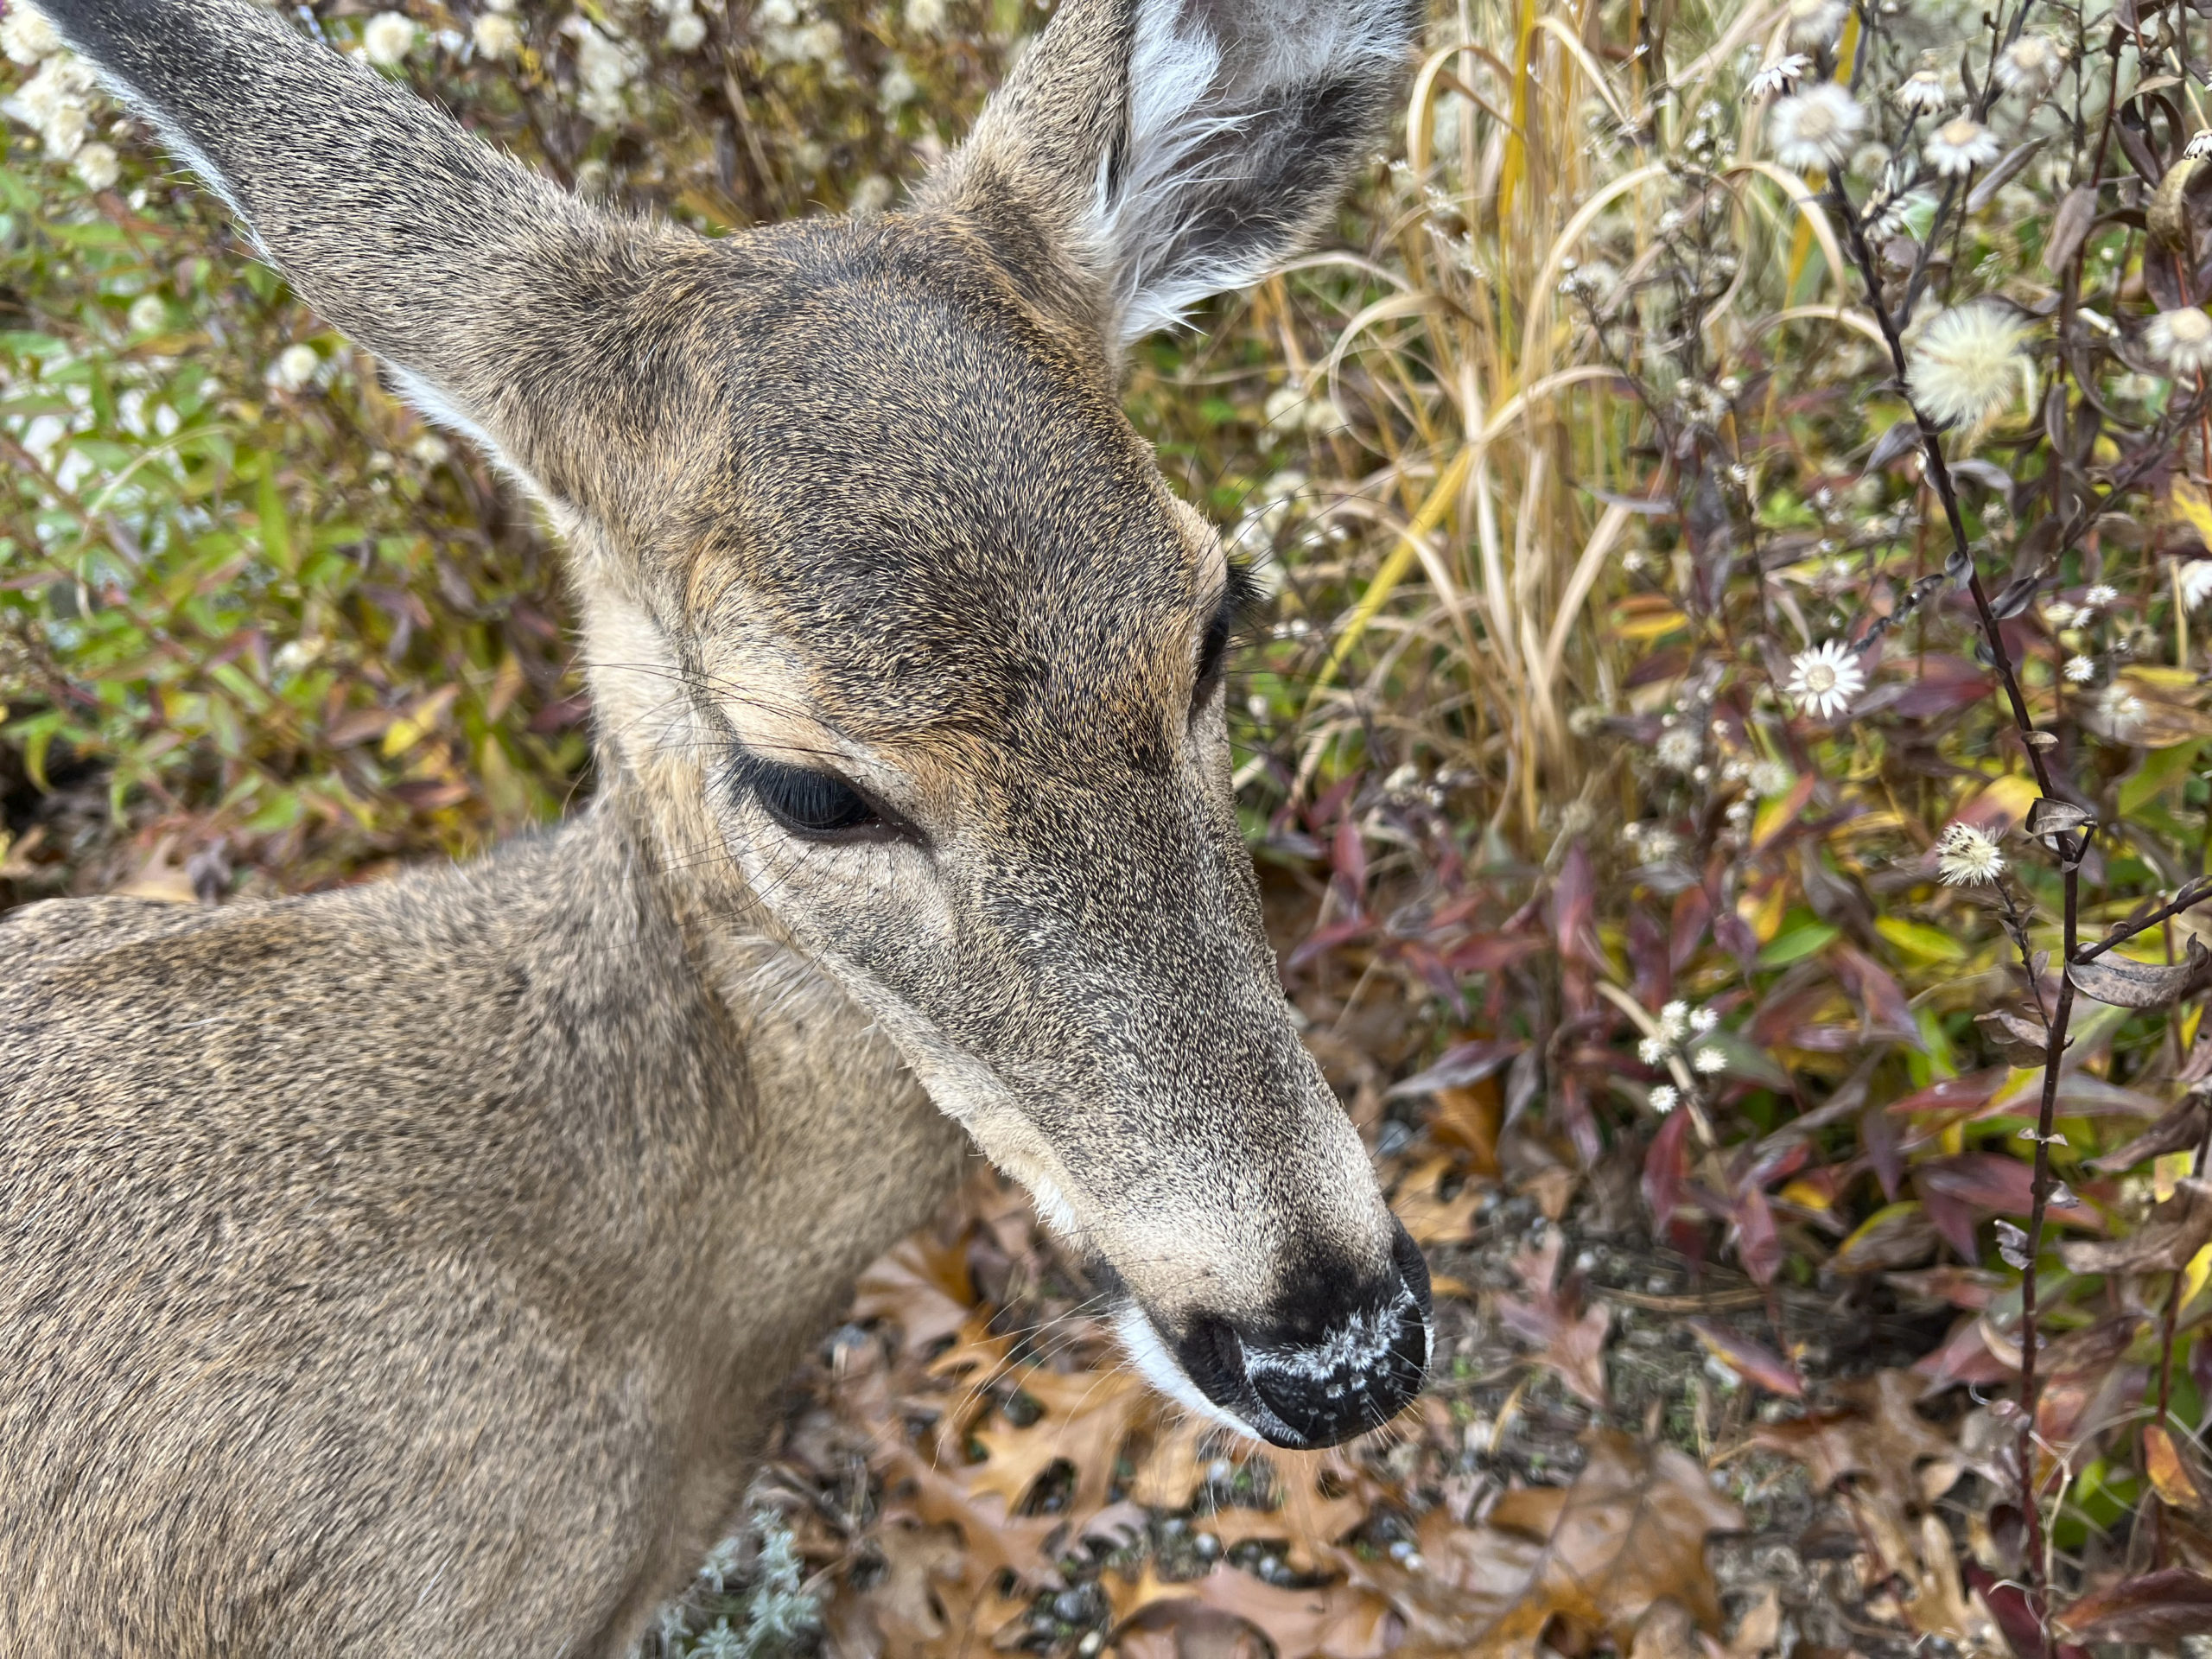 Recent studies have indicated that the COVID-19 virus is spreading throughout the white-tailed deer population in the United States.  DANA SHAW